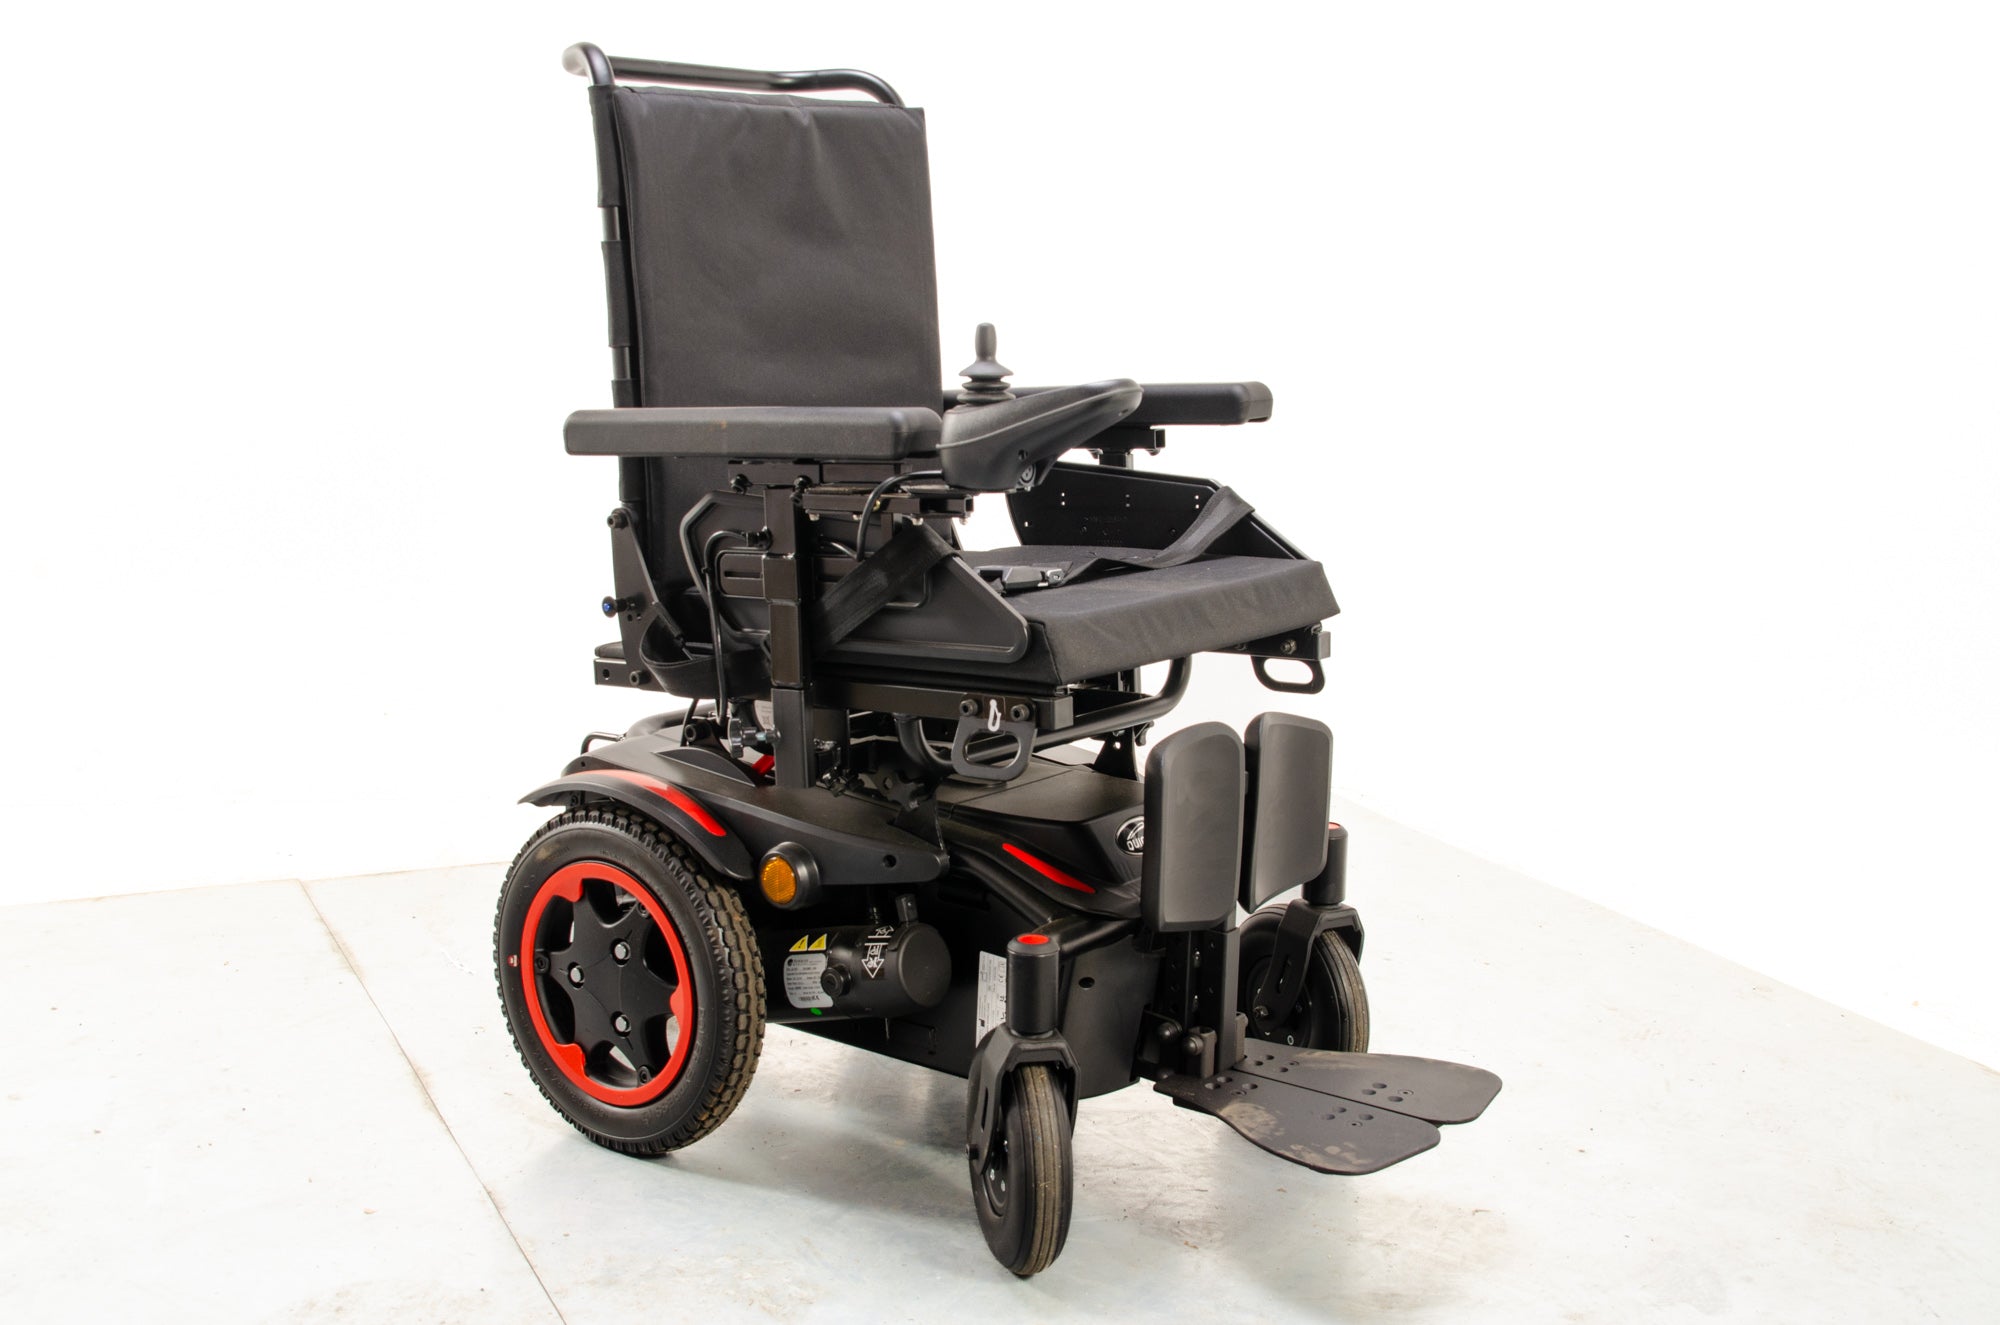 2022 Quickie Q100 R Compact Indoor Outdoor Powerchair Wheelchair Sunrise Medical